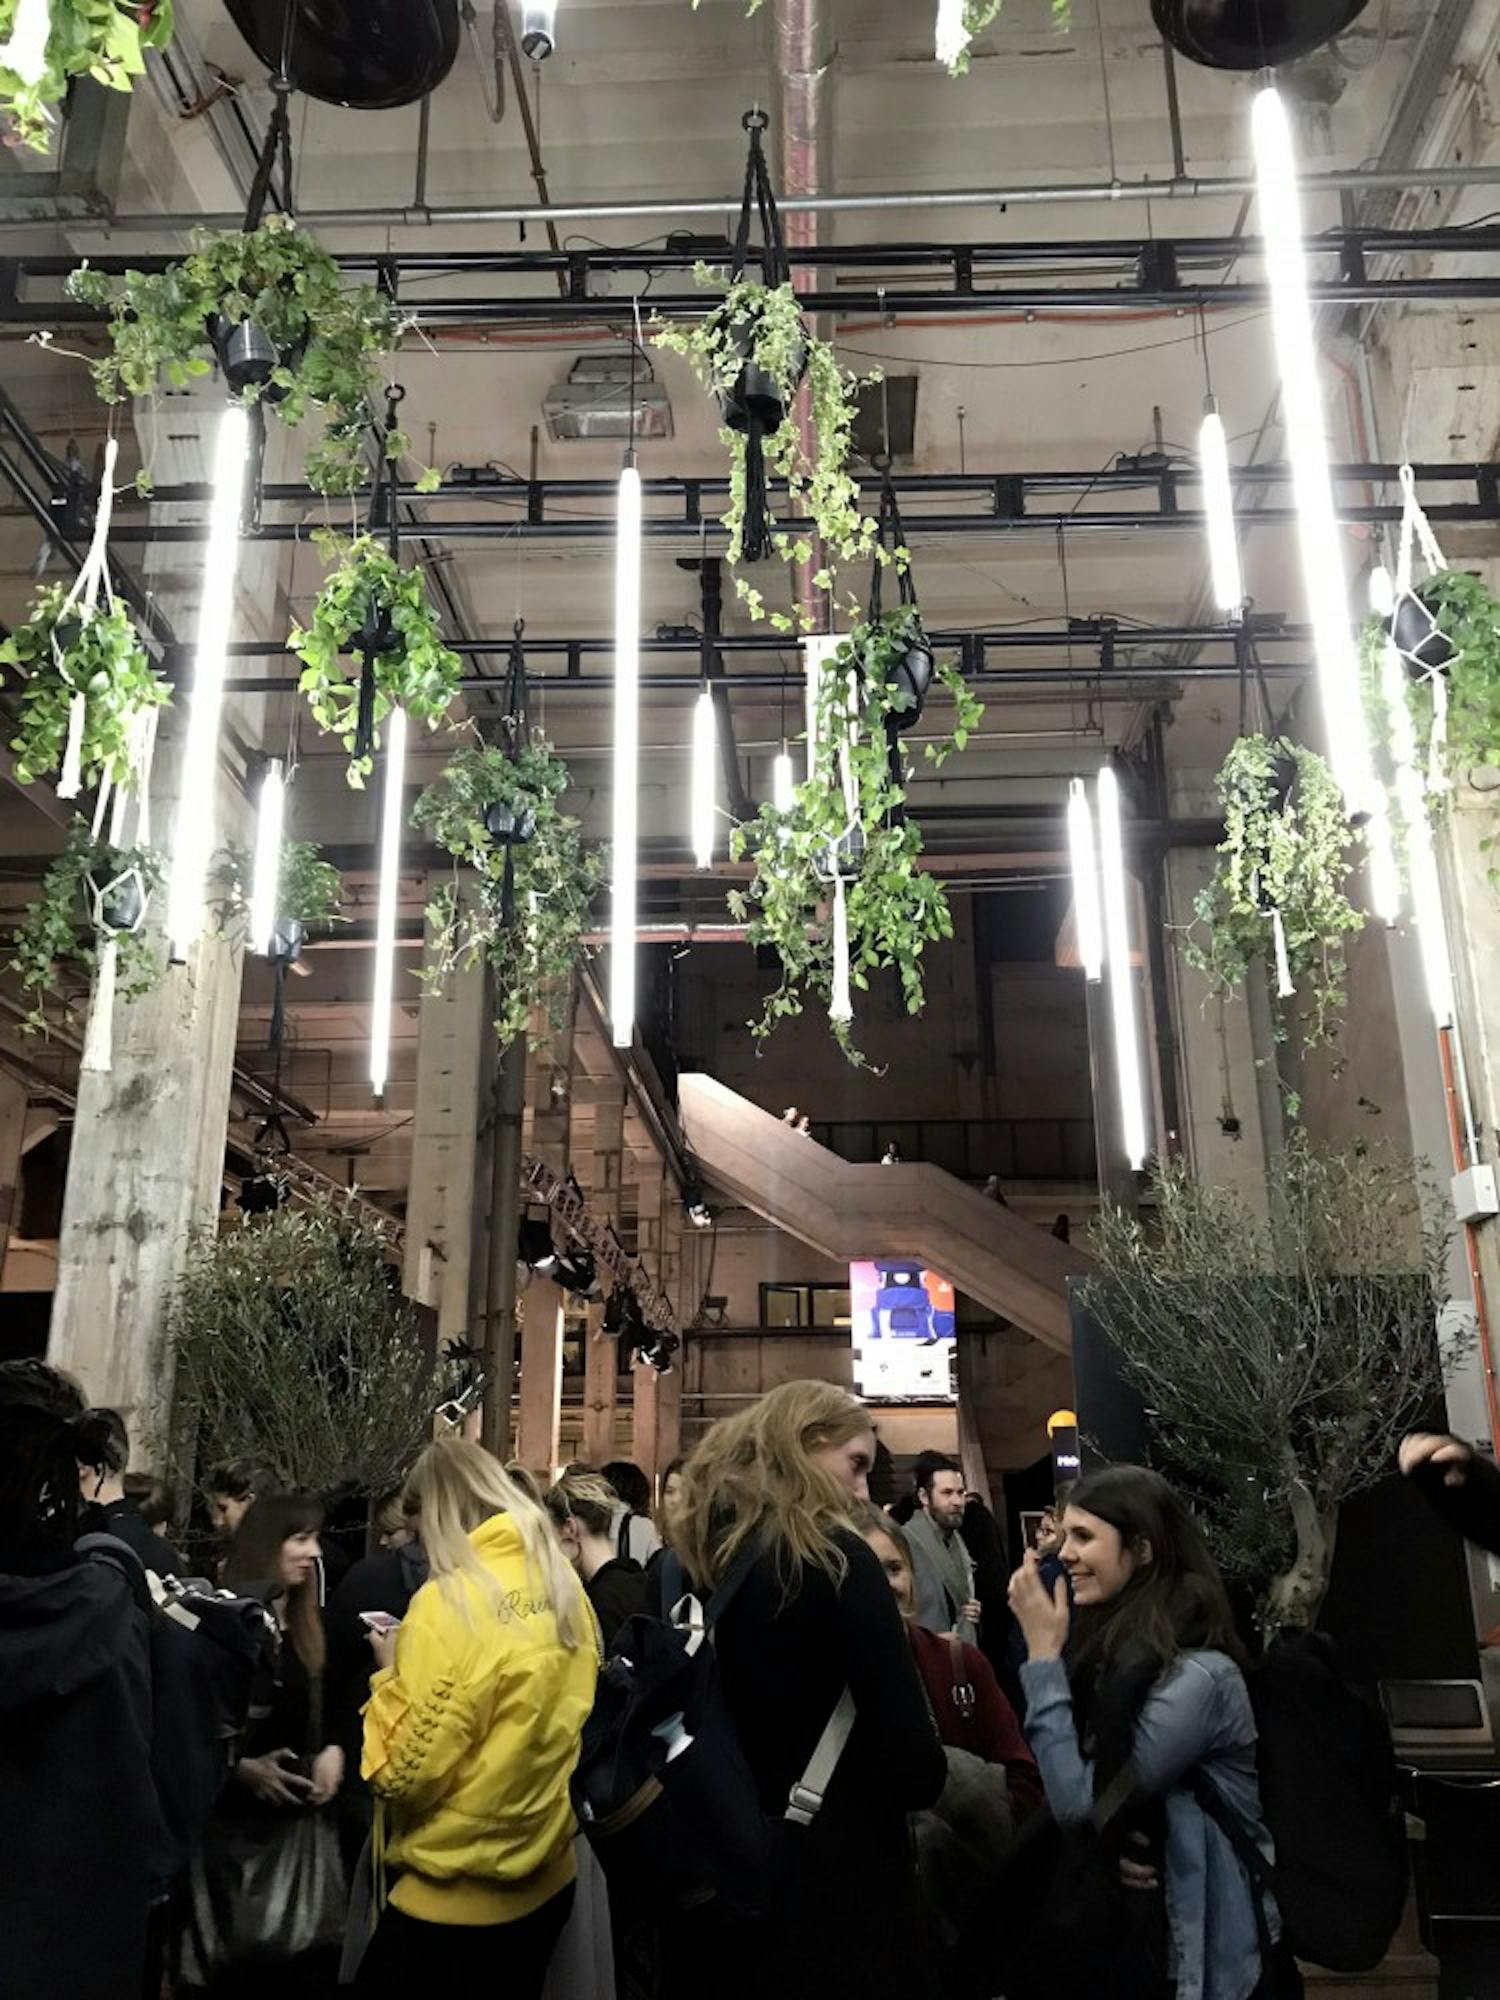 The third annual&nbsp;Ethical Fashion Show Berlin took place Jan. 16-18 at the former Kraftwerk power plant, now a vibrant and energetic venue for exhibits and events. It involved over 120 vendors and a catwalk finale with 25 models wearing the hottest ethical styles.